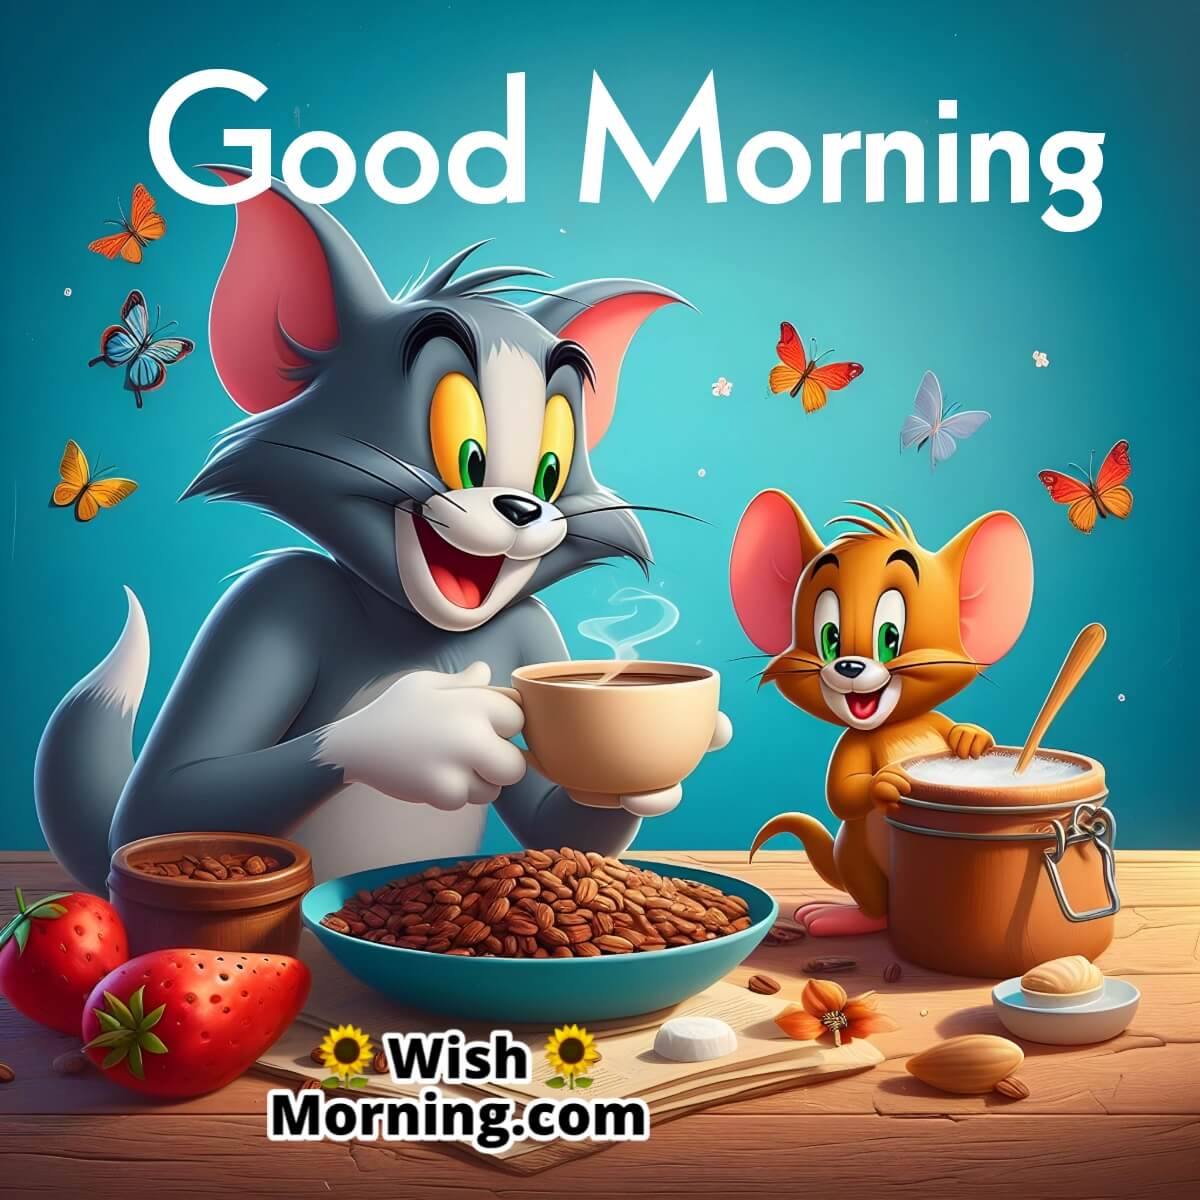 Good Morning Tom And Jerry Image